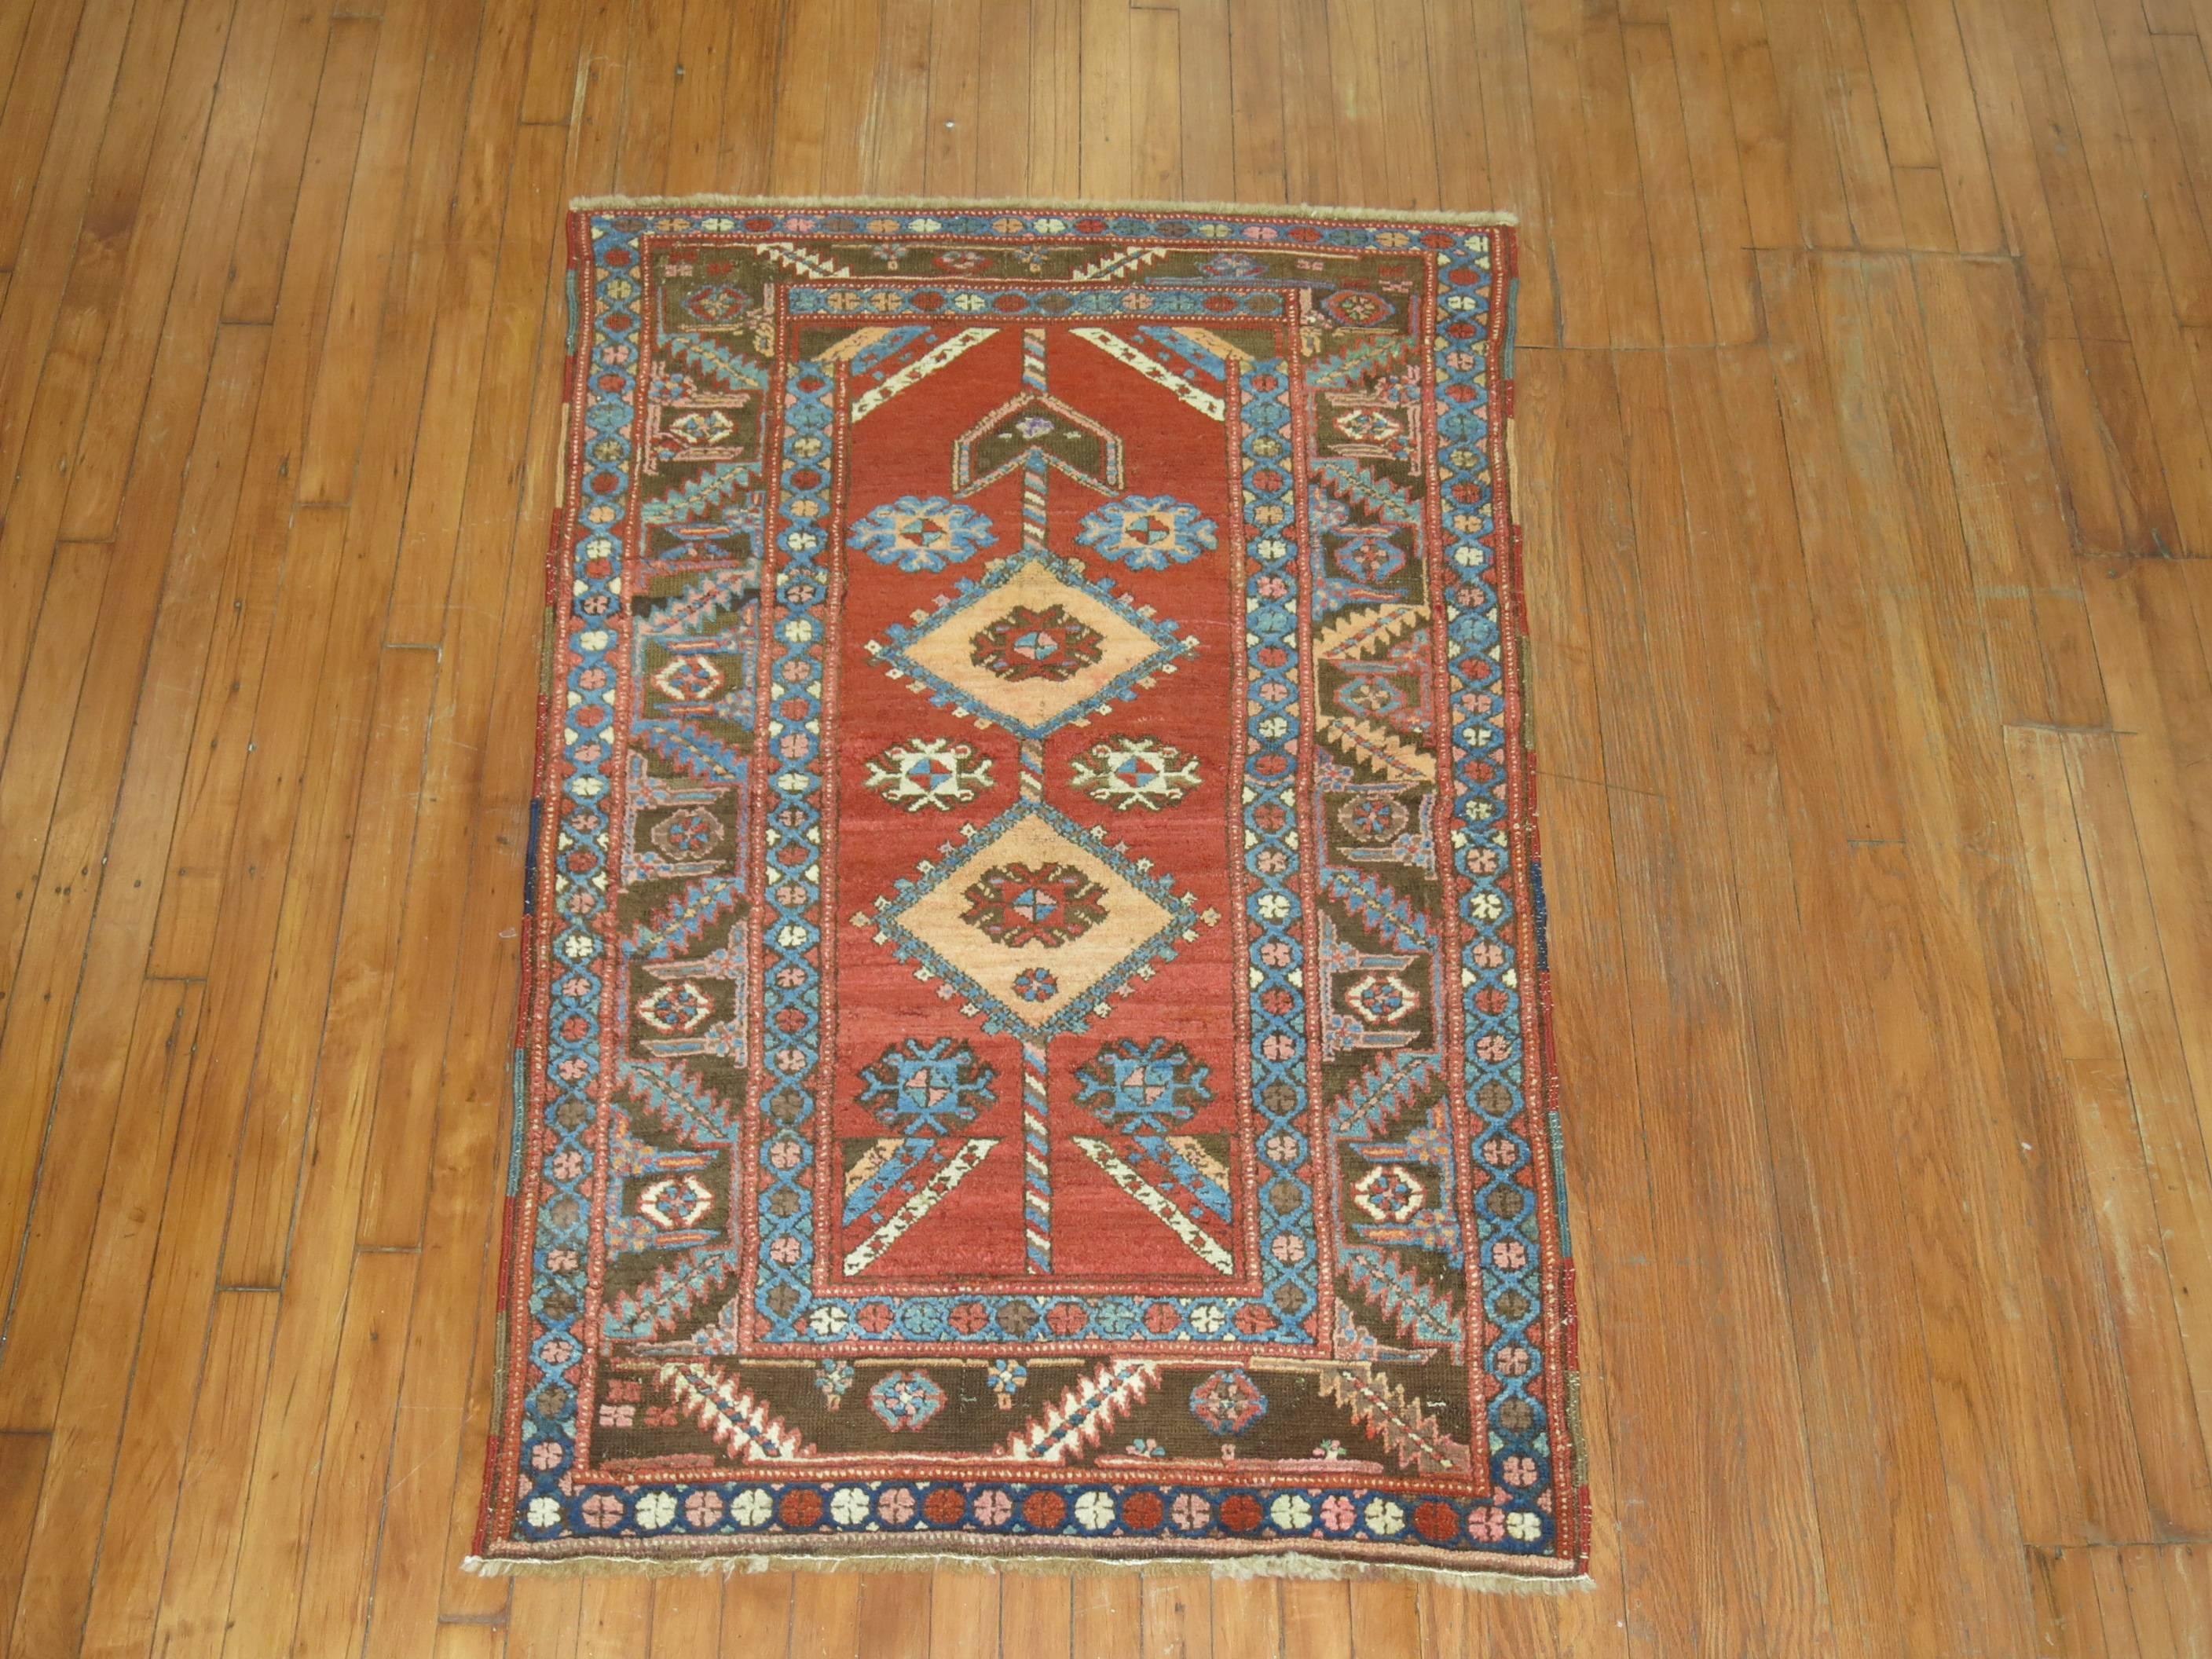 An early 20th century Northwest Persian rug with Bakshaish characteristics.

Bakshaish weavers employed both soft reds and blue tones for the base color of the field, with the use of ivory or sometimes, golden Camelhair grounds being particularly